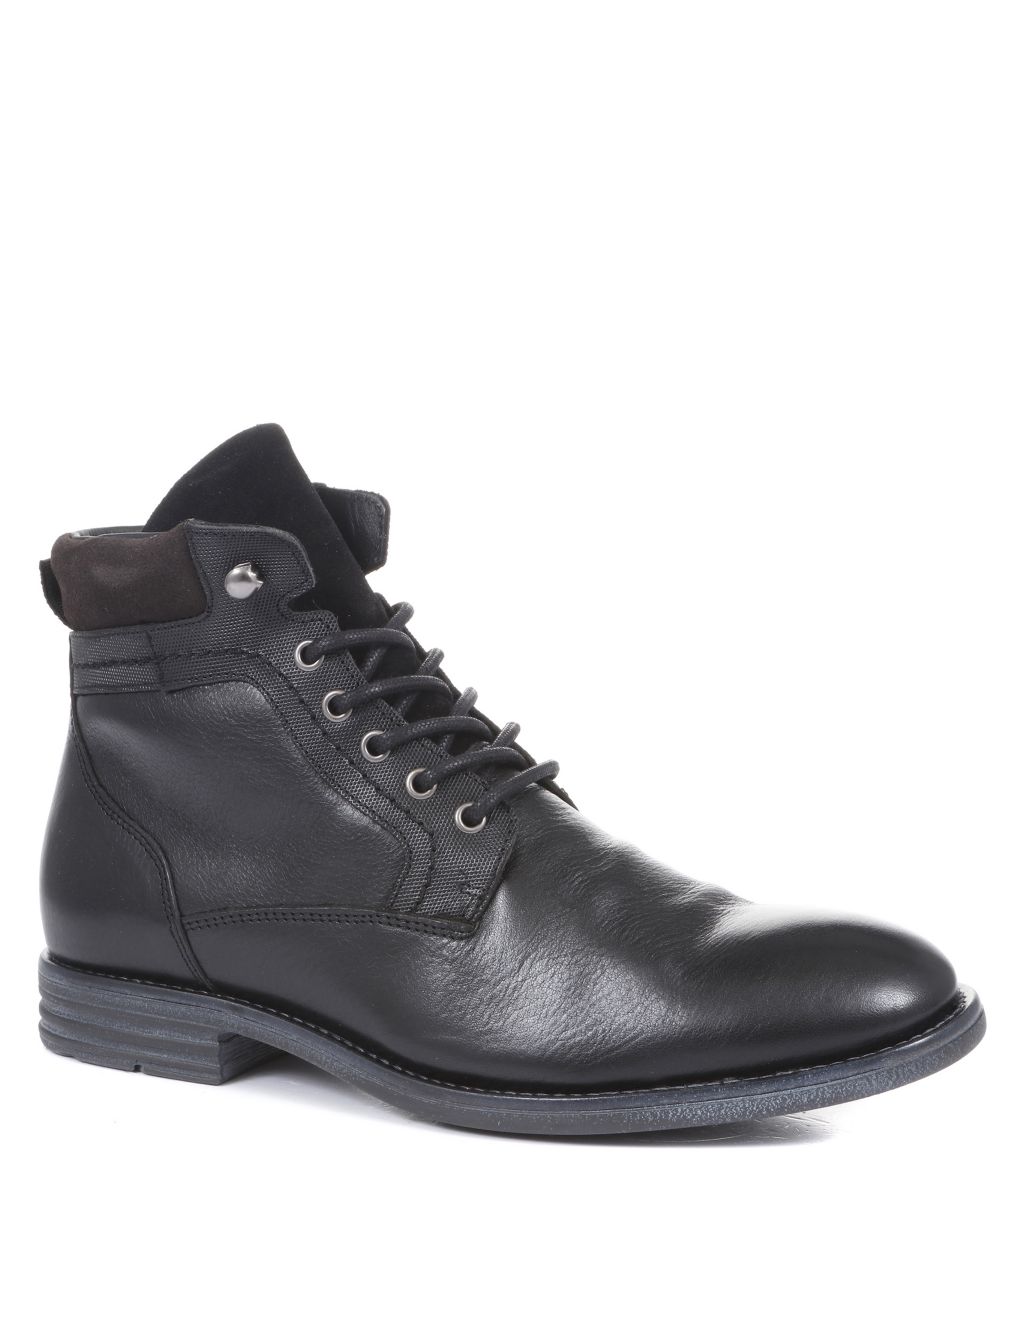 Leather Casual Boots | Jones Bootmaker | M&S